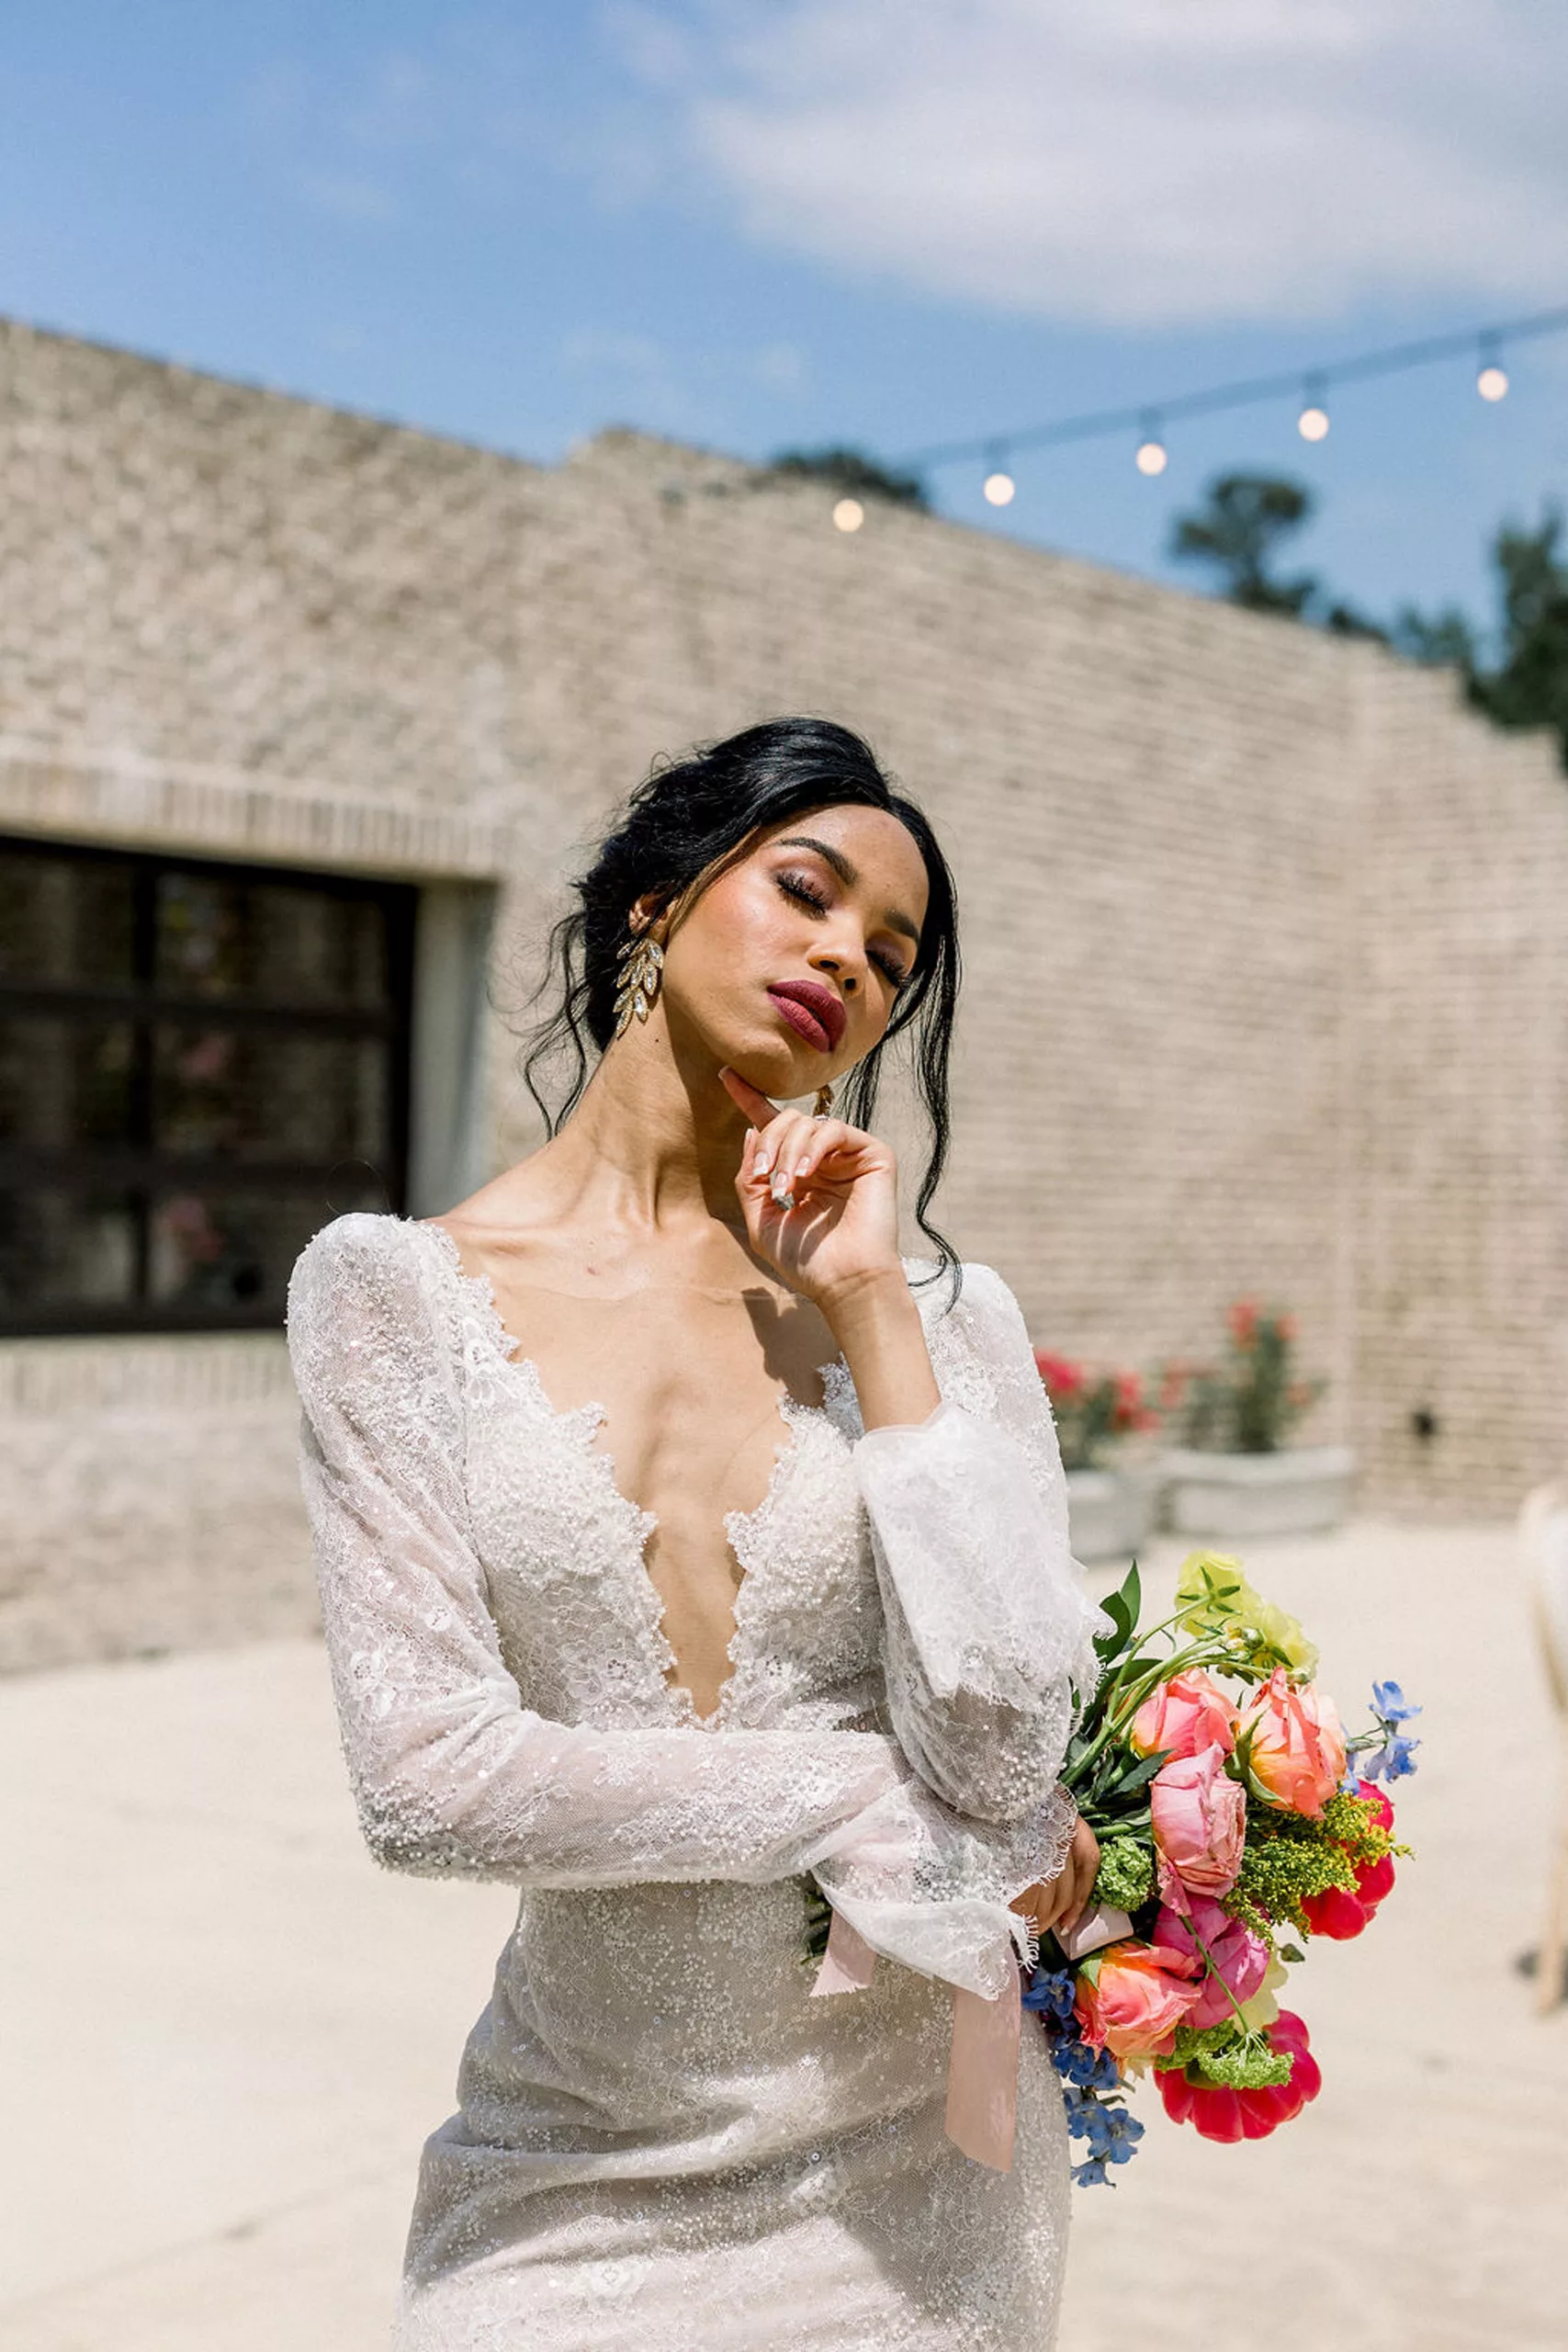 A bride in a white lace dress stands in the sun on a patio while holding a finger under her chin and her bouquet in the other hand at a iron manor wedding